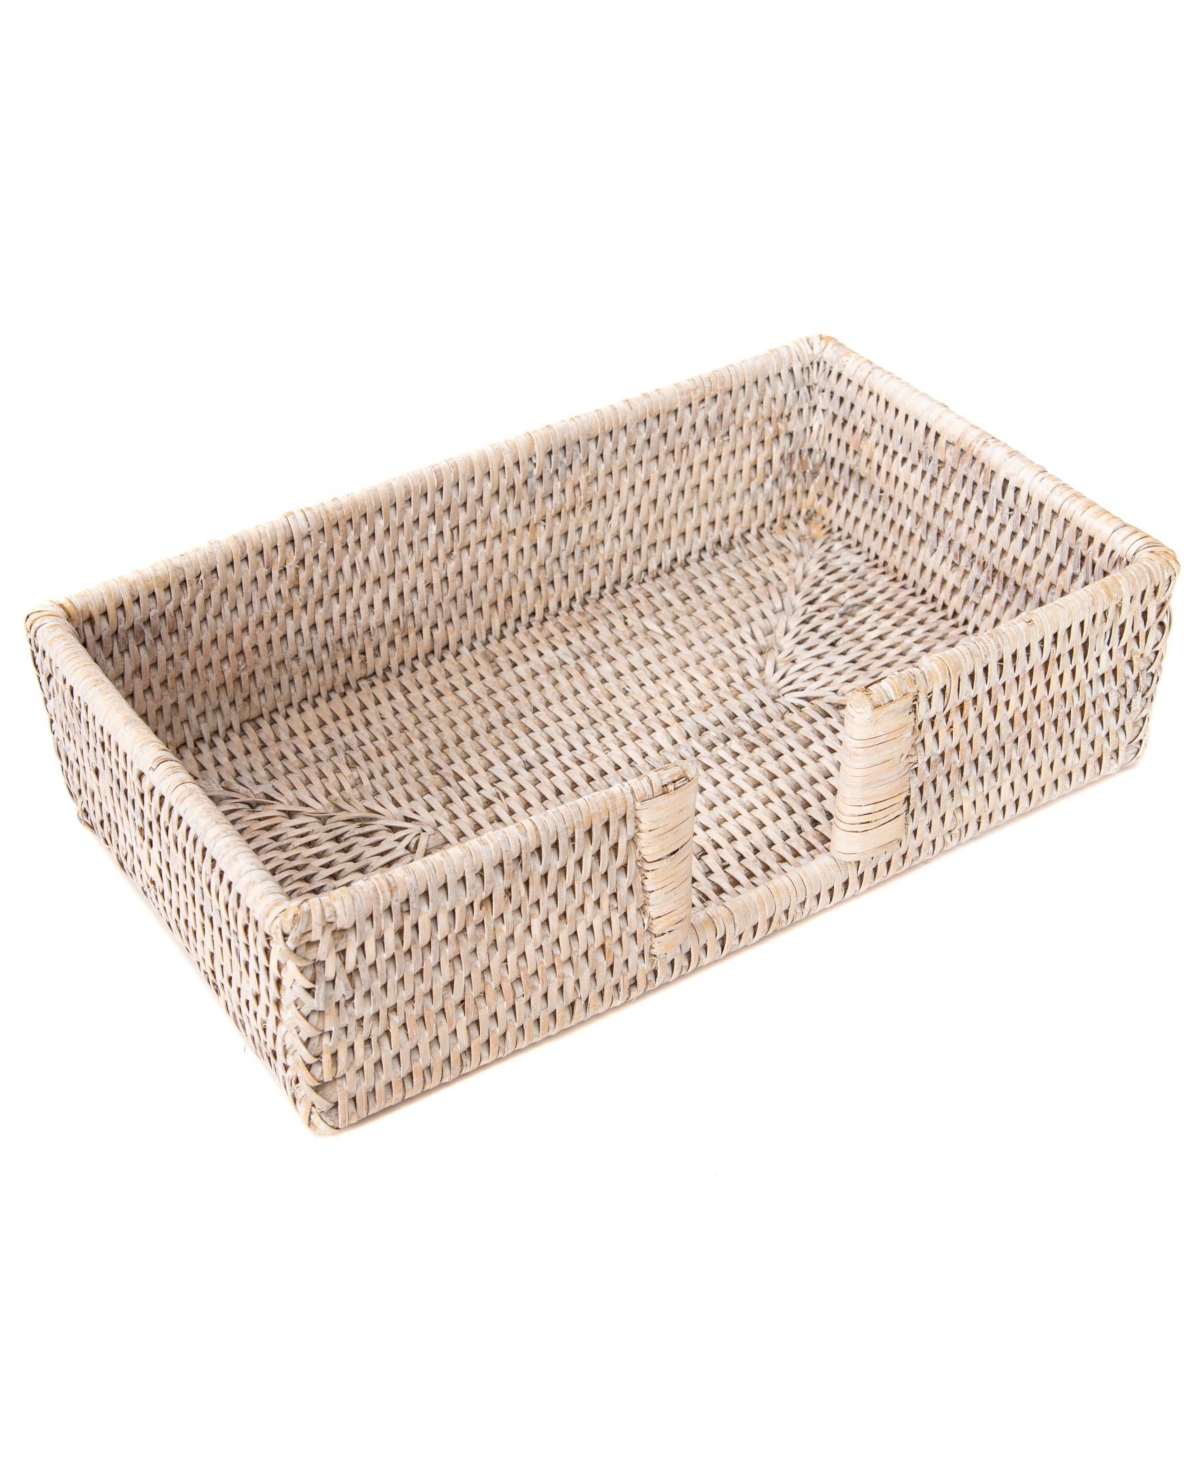 Shop Artifacts Trading Company Artifacts Rattan Rectangular Guest Towel Napkin Holder With Cutout In Open White